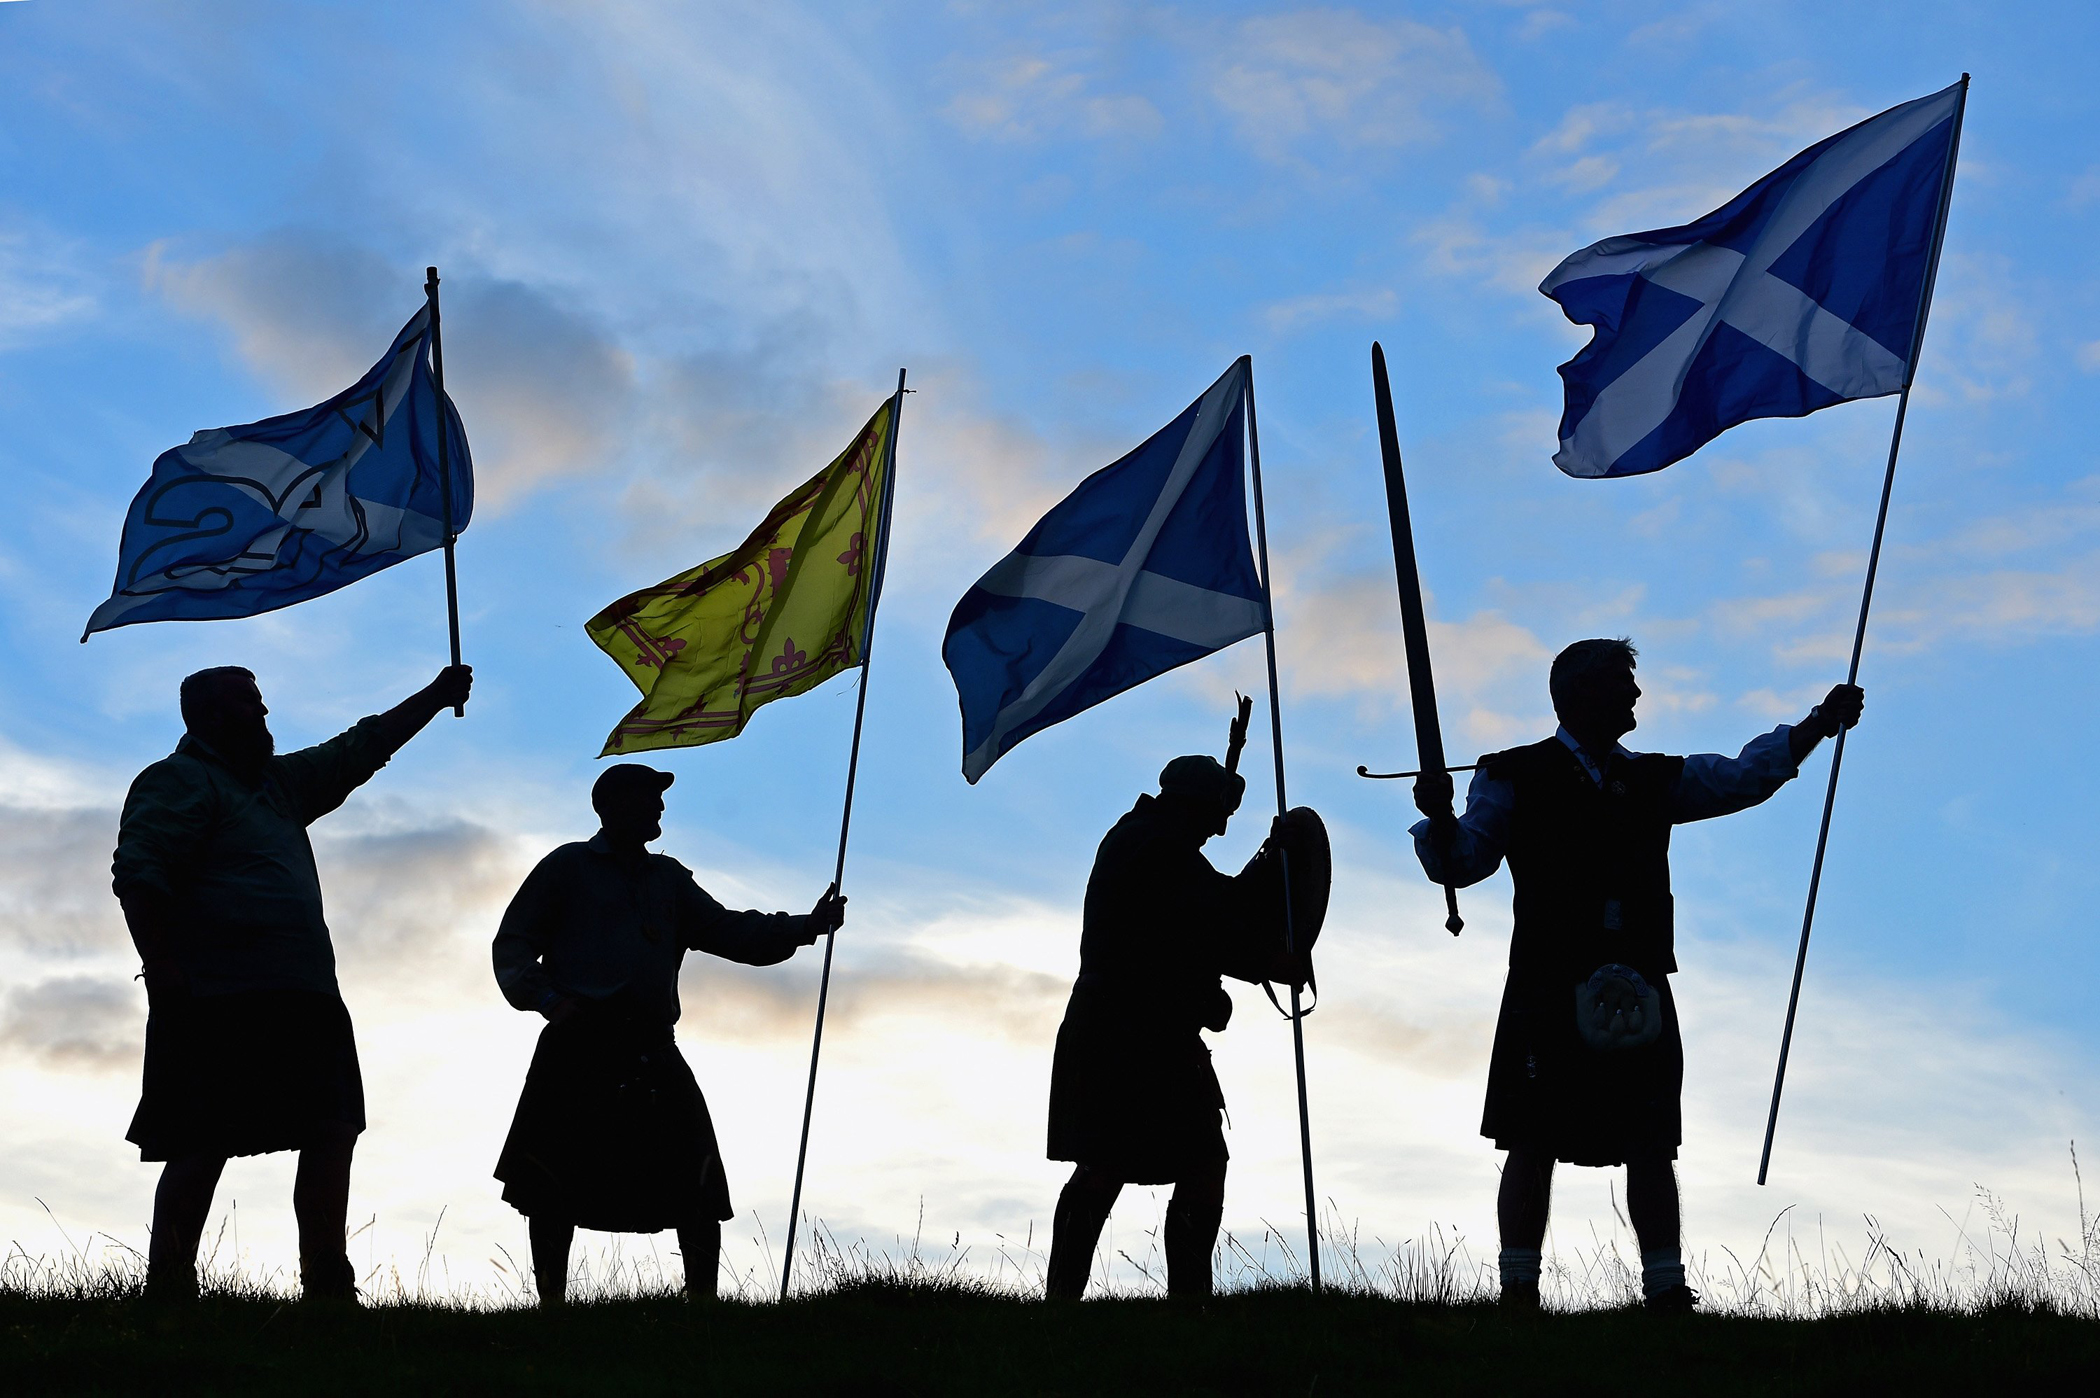 Men from King of Scots Robert the Bruce Society, hold the Scottish flags as they prepare to vote in the Scottish independence referendum on Sept 14, 2014 in Loch Lomond.